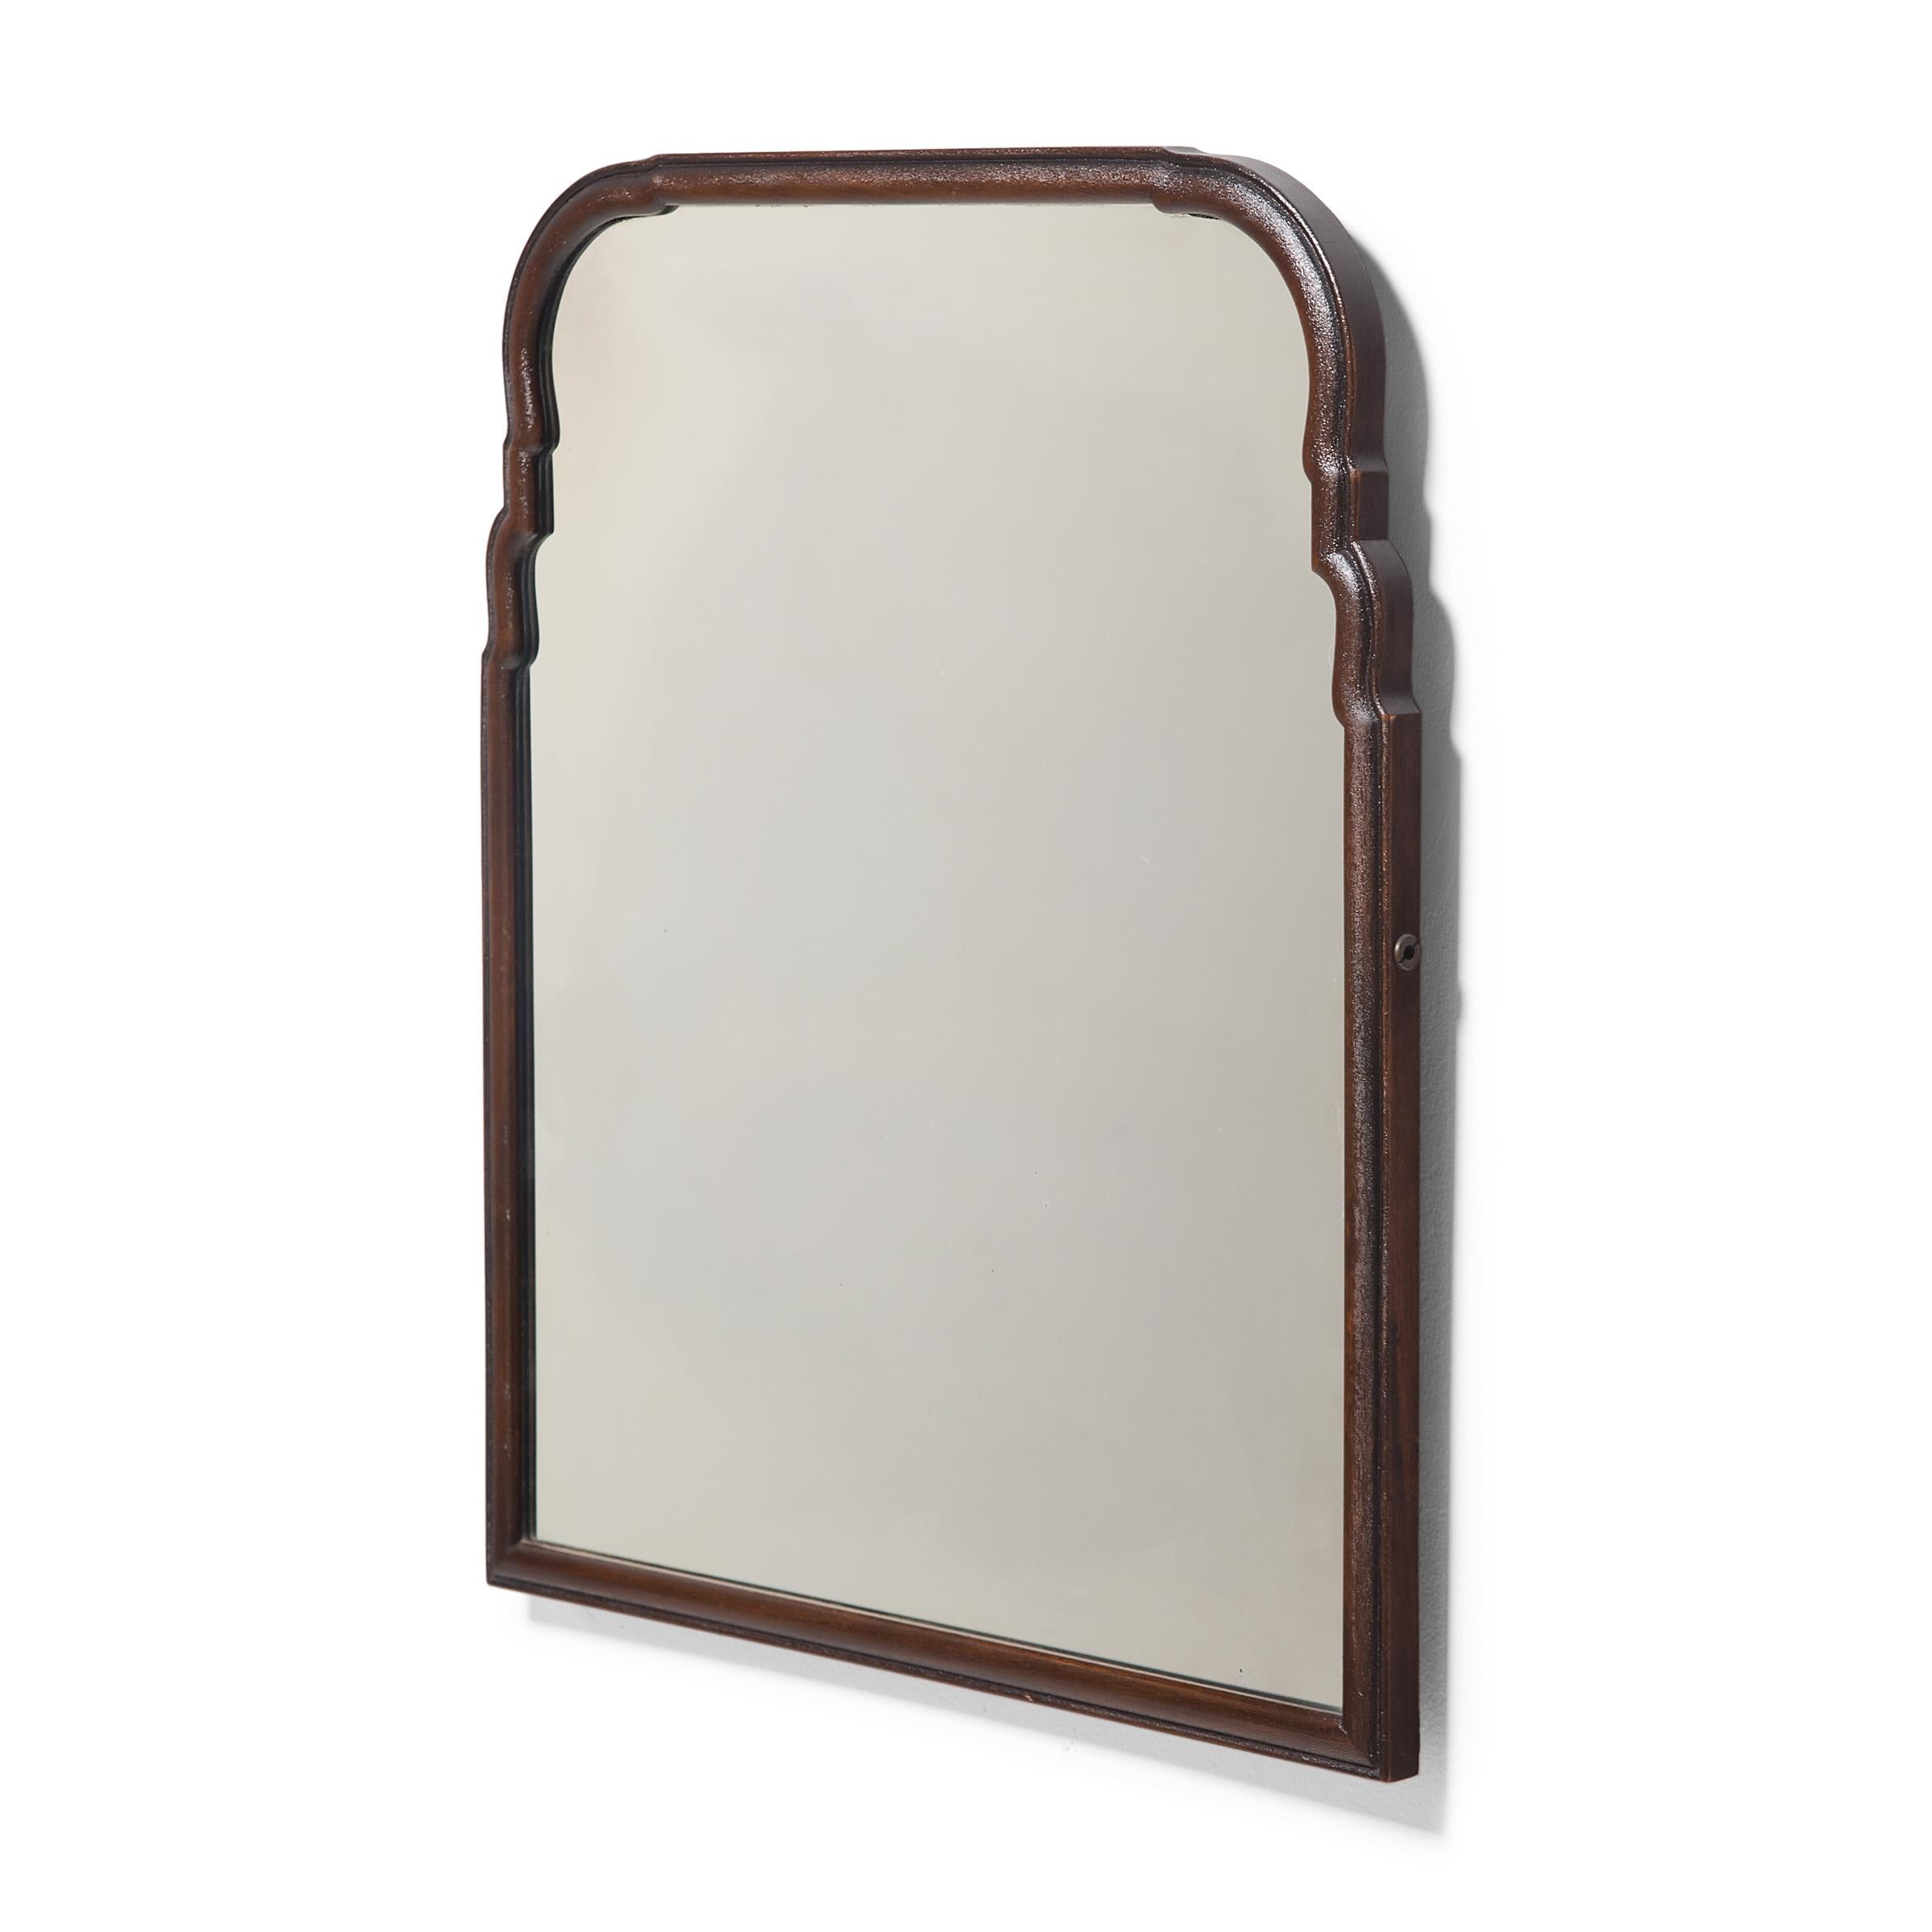 This elegant vintage wall mirror is enclosed by a narrow hardwood frame and features an arched top with sinuous, stepped corners. The rounded frame is stained dark brown and finished with a beaded edge. Years of use have imparted a rich patina and